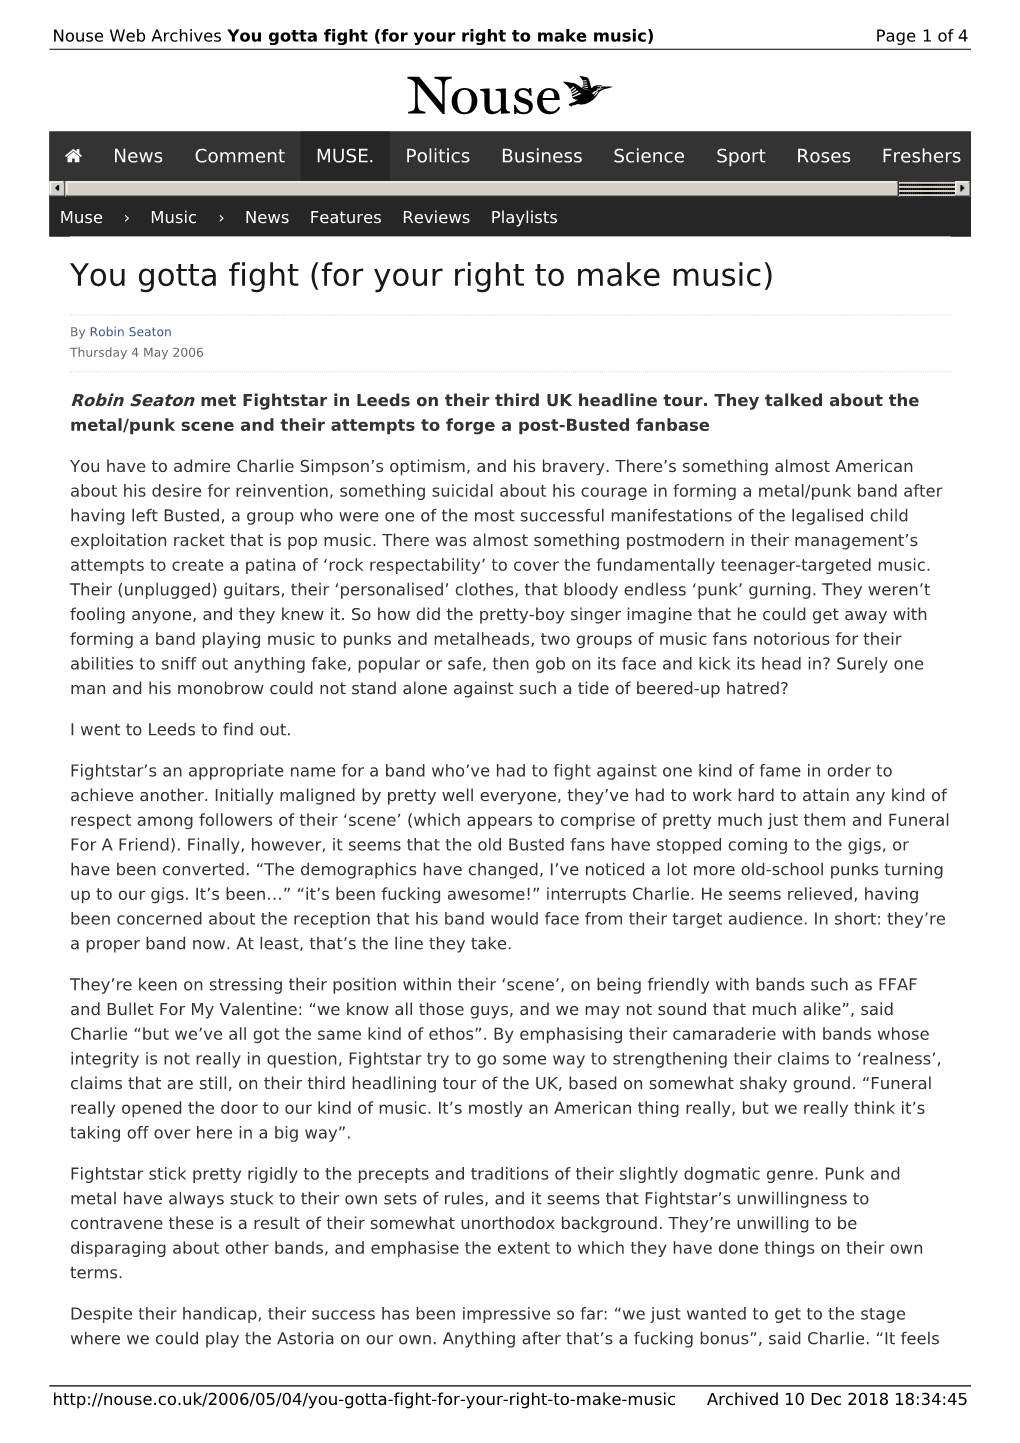 You Gotta Fight (For Your Right to Make Music) | Nouse